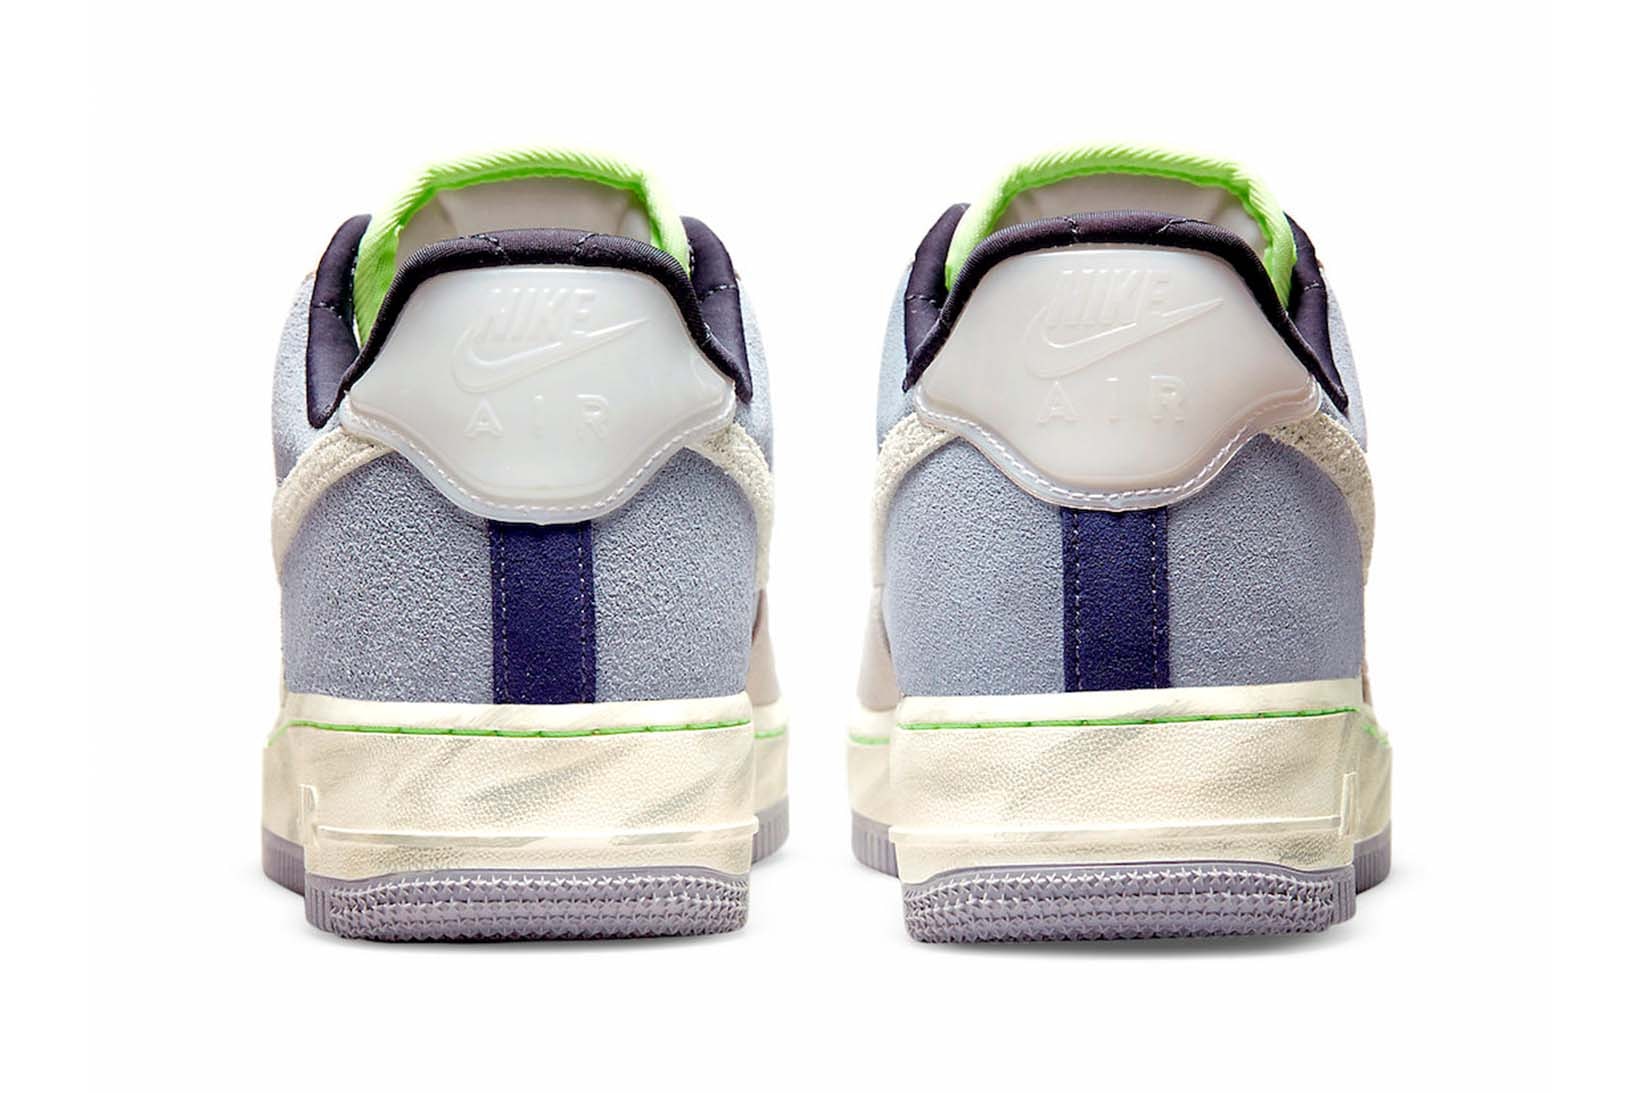 Nike Air Force 1 07 LX Low Womens Mountain White Greystone Price Release Date